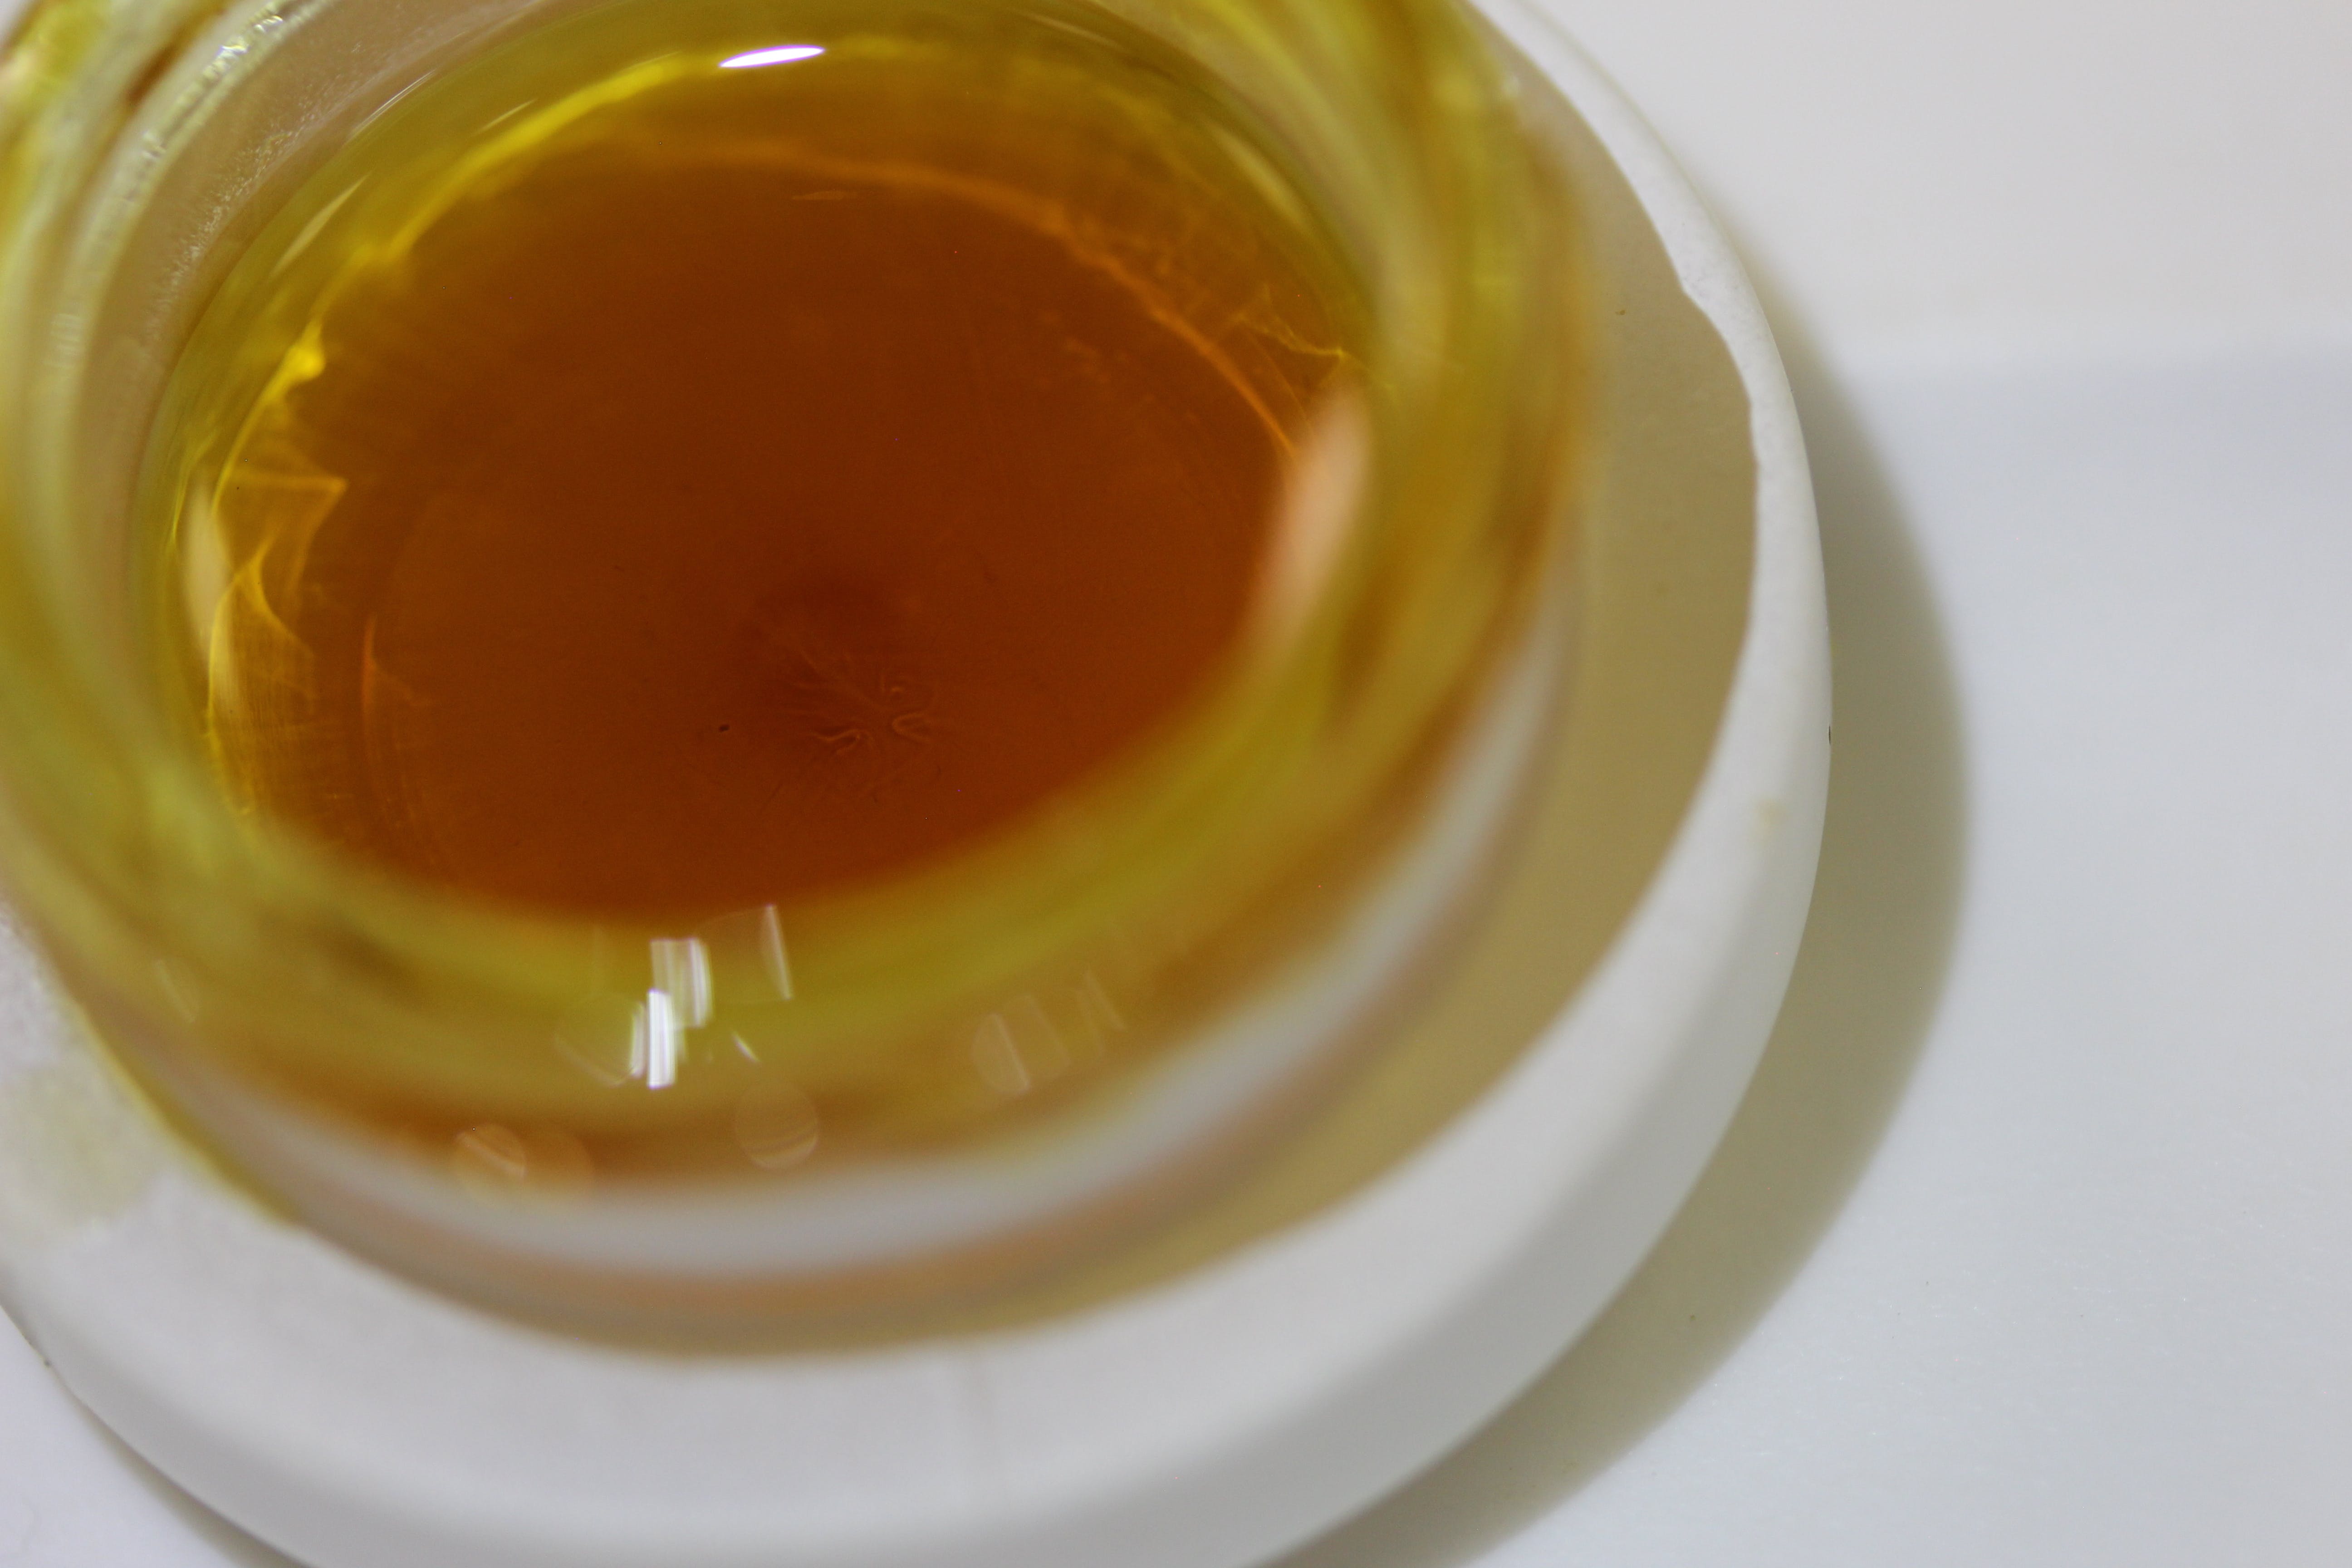 concentrate-4g-raw-distillate-container-famous-xtracts